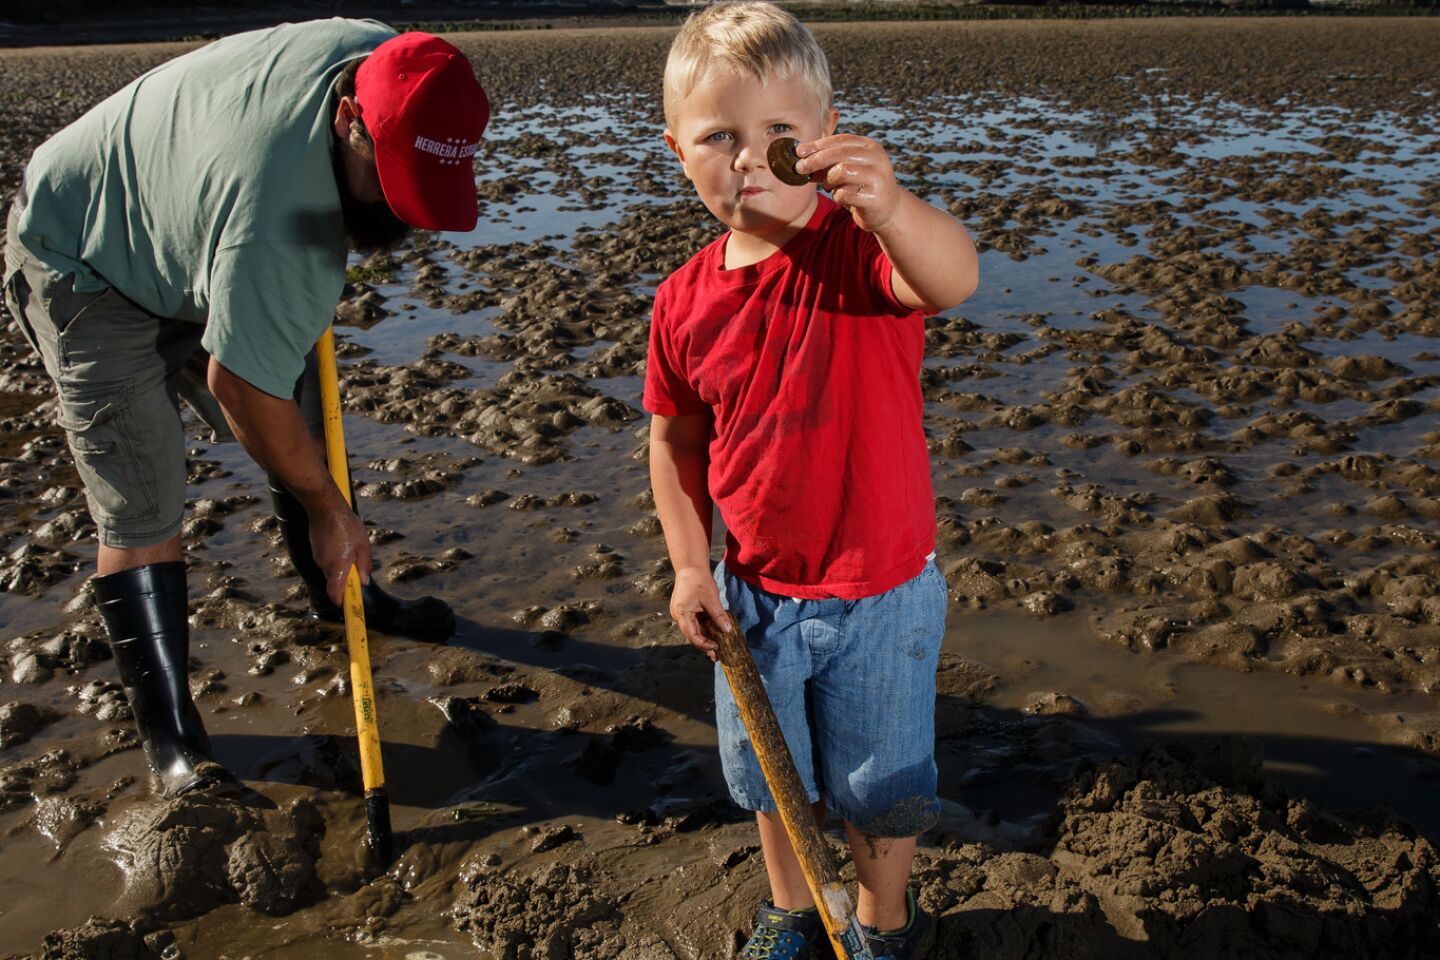 Clamming and crabbing in Oregon